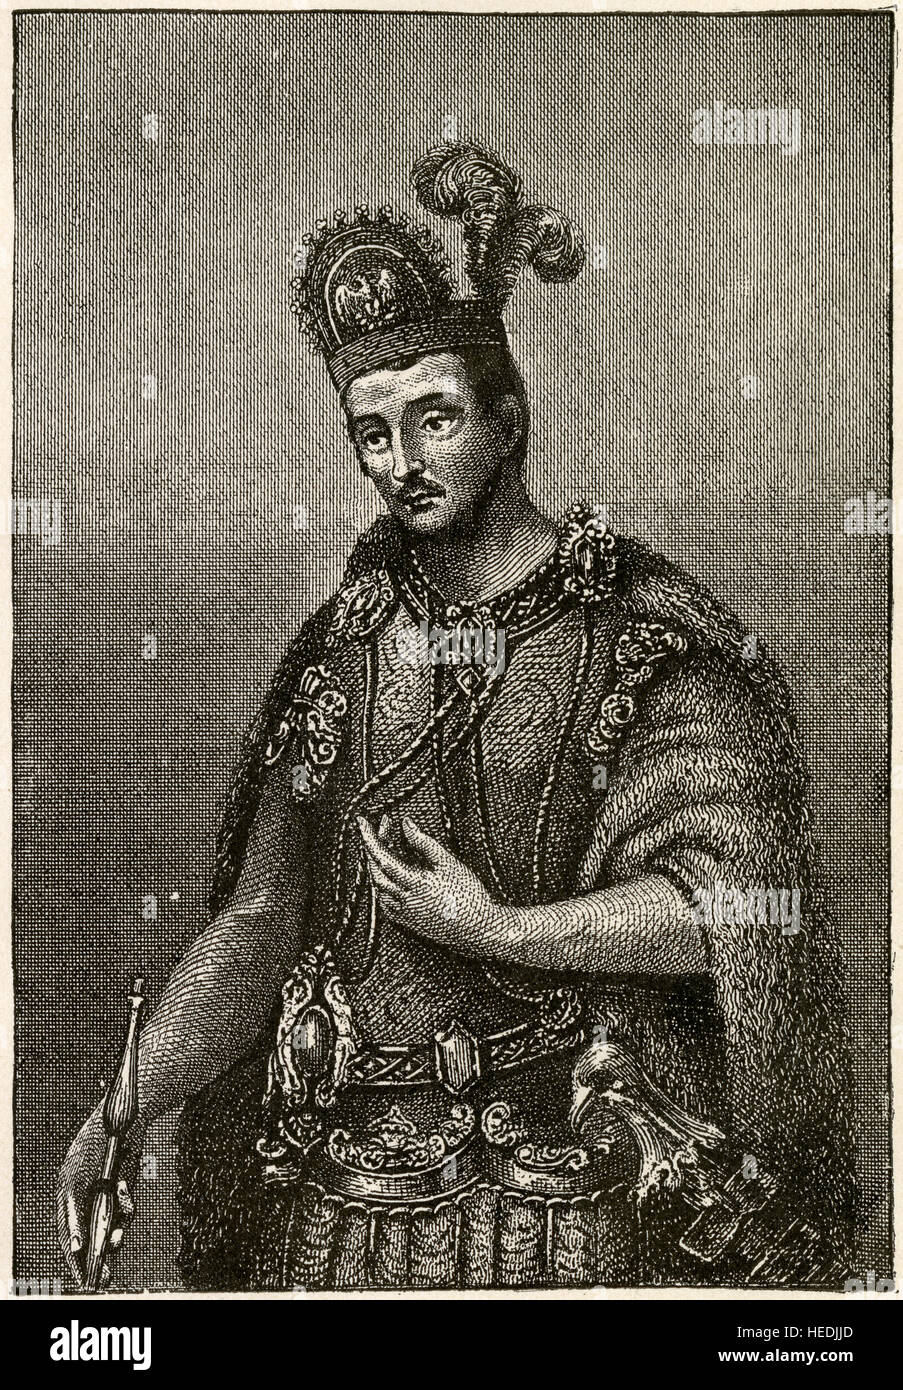 Antique 1873 engraving, King Montezuma II. Moctezuma II (1466-1520) was the ninth ruler of Tenochtitlan, reigning from 1502 to 1520. The first contact between indigenous civilizations of Mesoamerica and Europeans took place during his reign, and he was killed during the initial stages of the Spanish conquest of Mexico. SOURCE: ORIGINAL ENGRAVING. Stock Photo